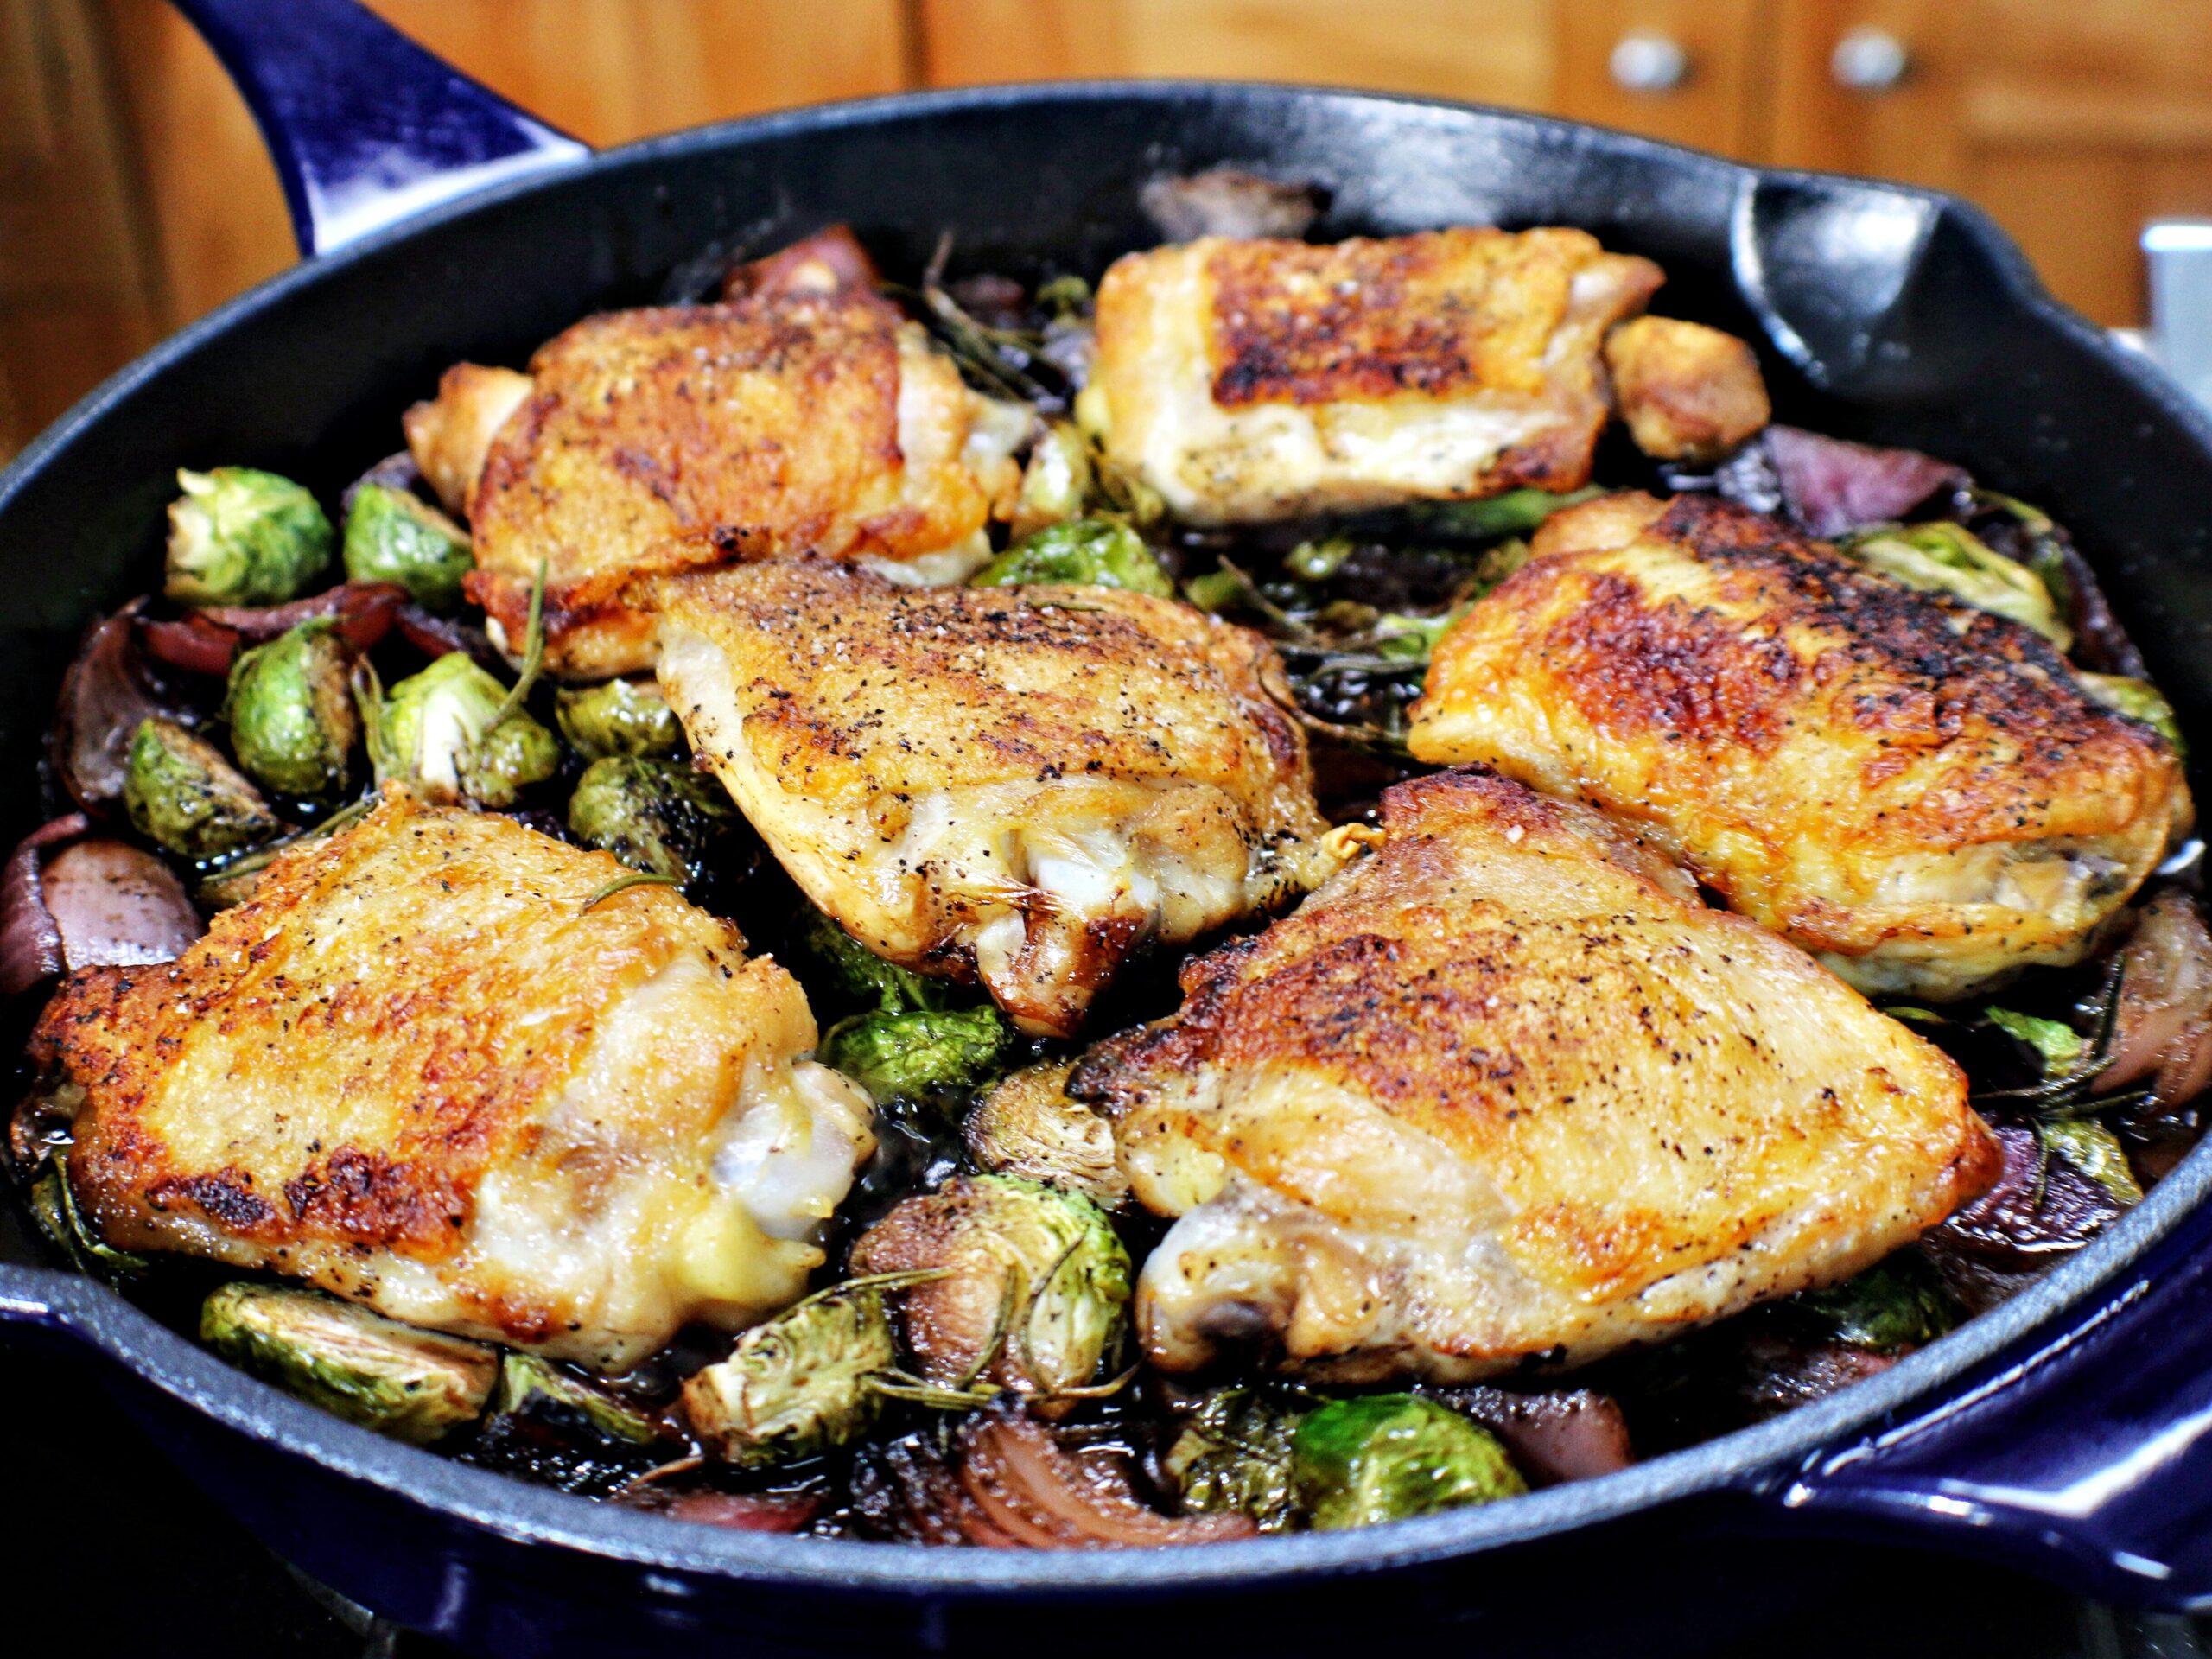  Aromatic herbs and spices create a wonderful Mediterranean aroma in this skillet